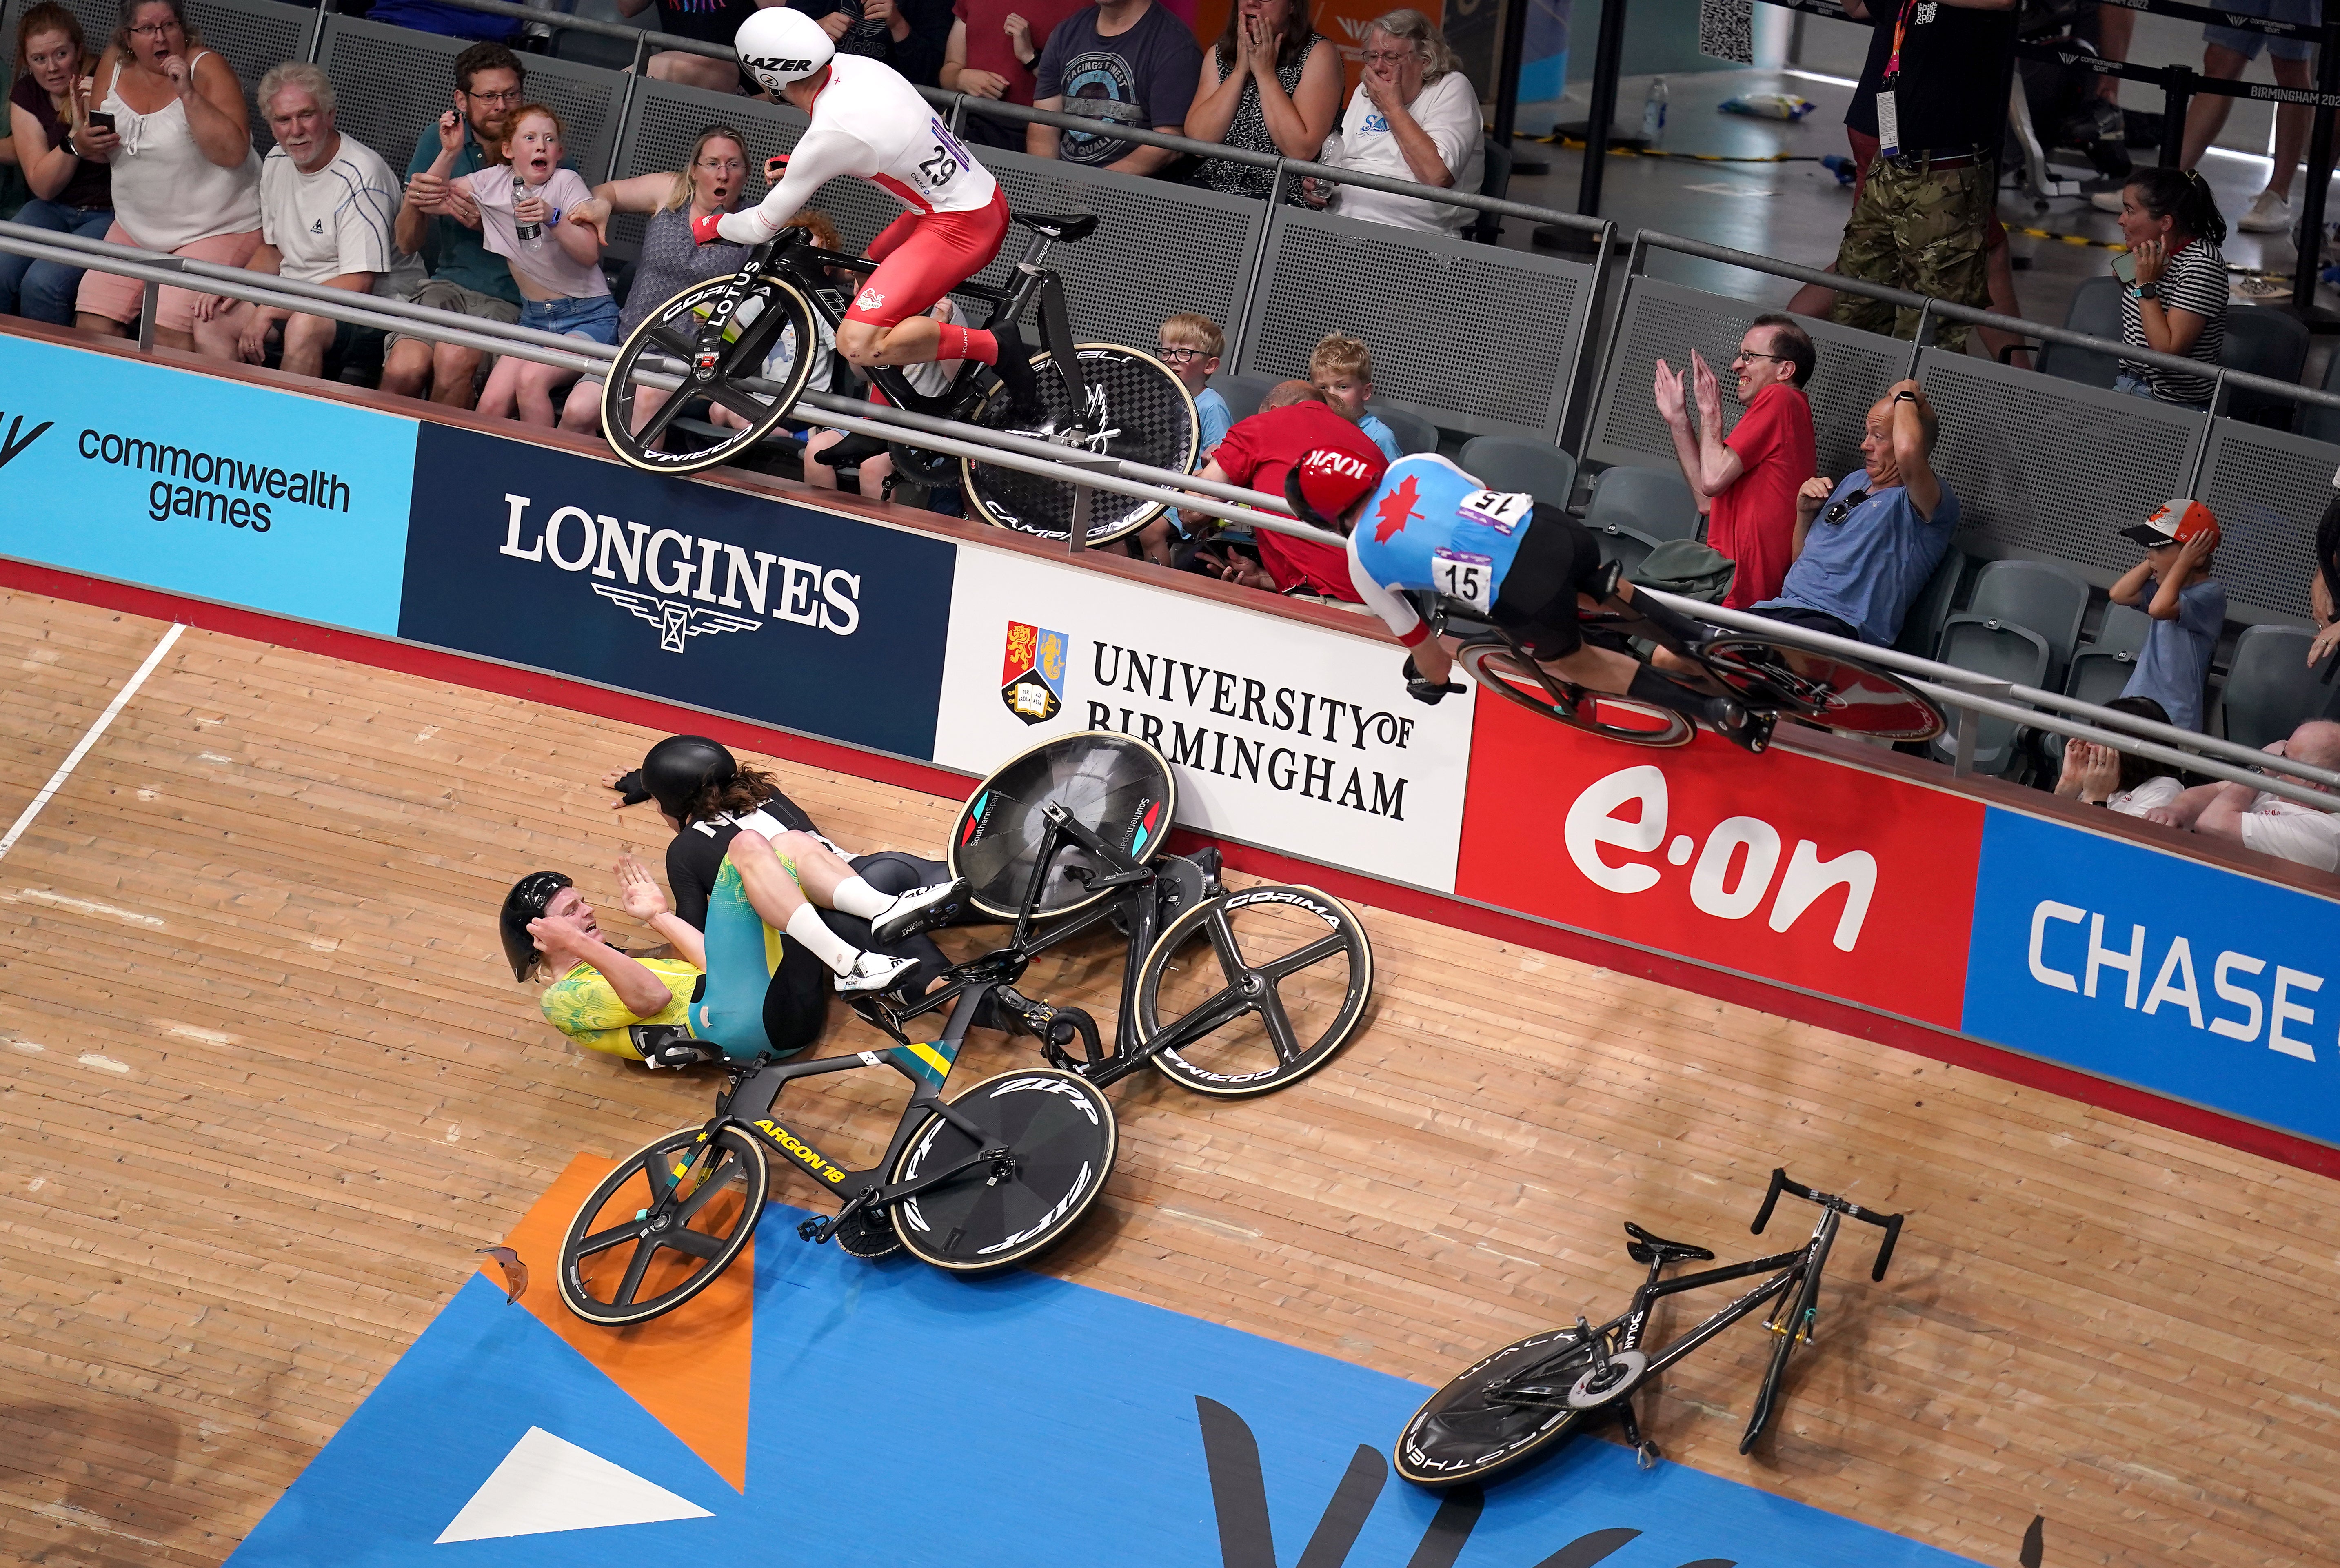 A crash caused chaos in the men’s 15km scratch race qualifying round as England’s Matt Walls went over the barrier (John Walton/PA)